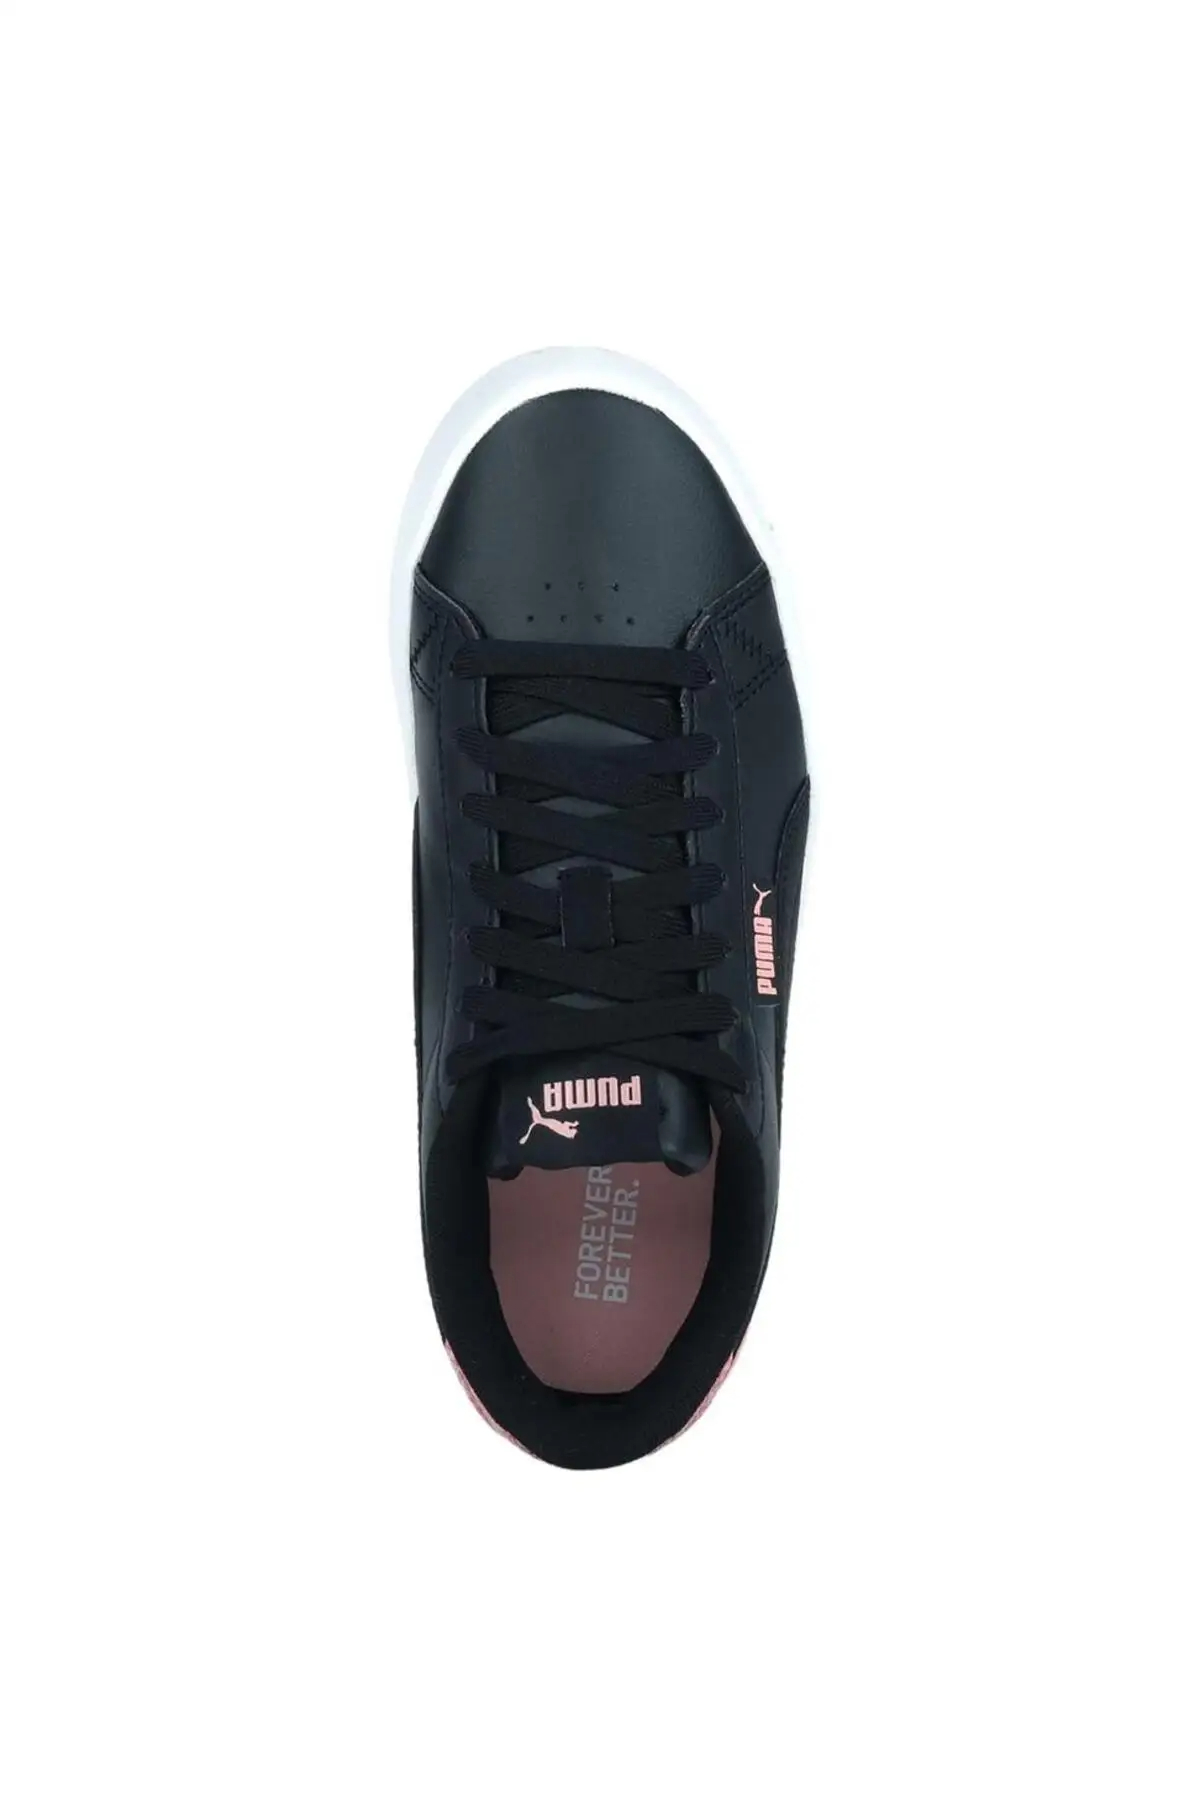 The Ultimate Guide to Women’s Puma Tennis Shoes插图2